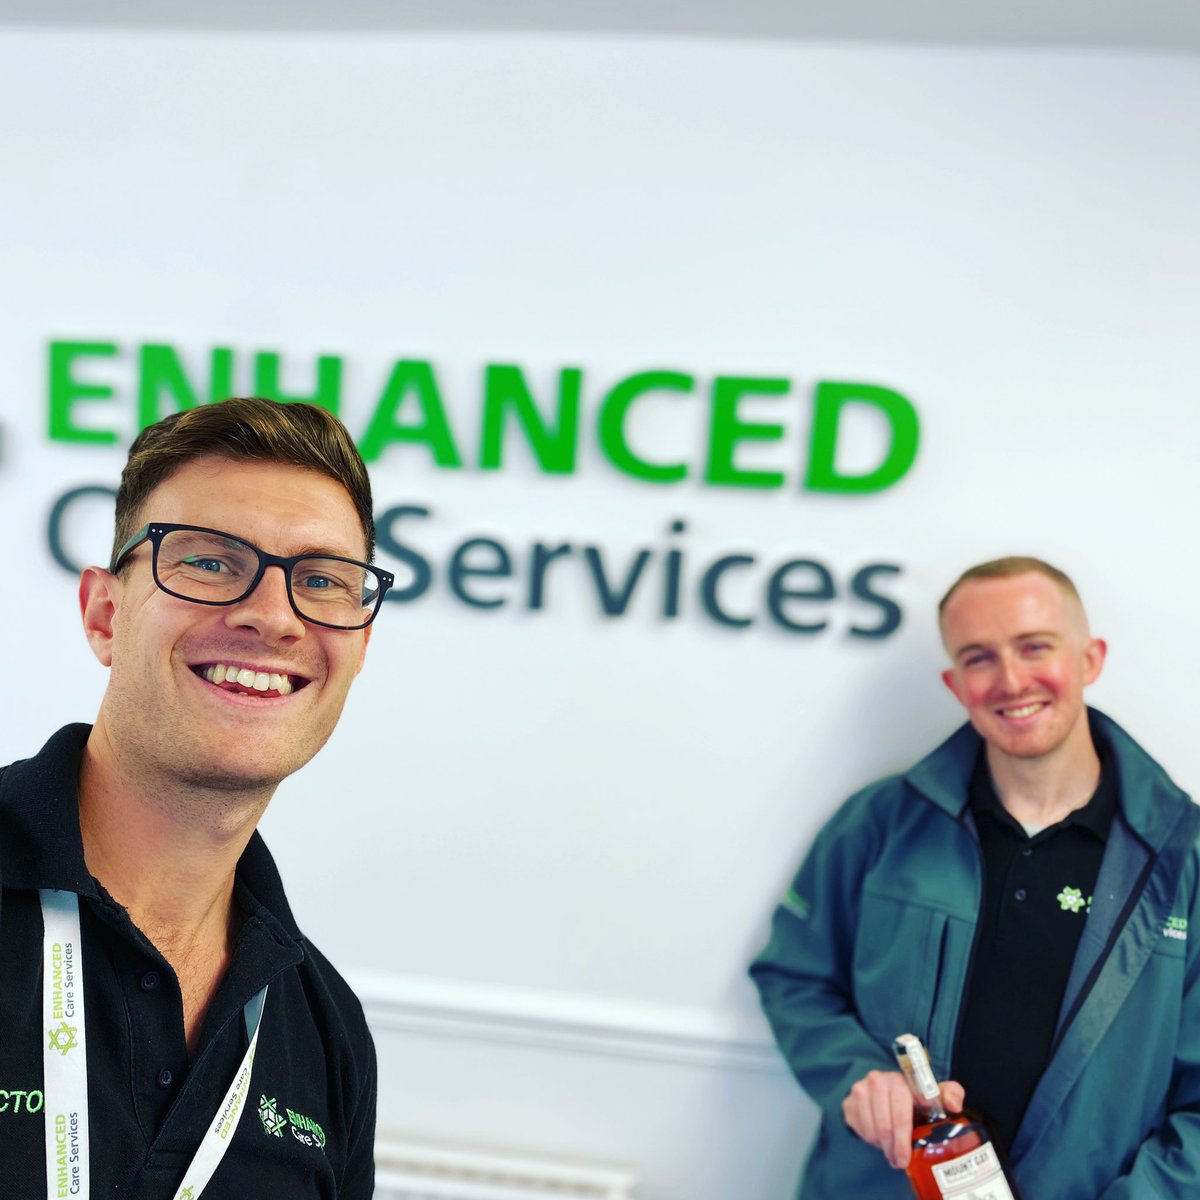 Saying thanks and a mini farewell to this chap @mattbracken92 as he leaves the office team to soon start his Paramedic career. Can’t wait to have you back out on the road! #TeamECS